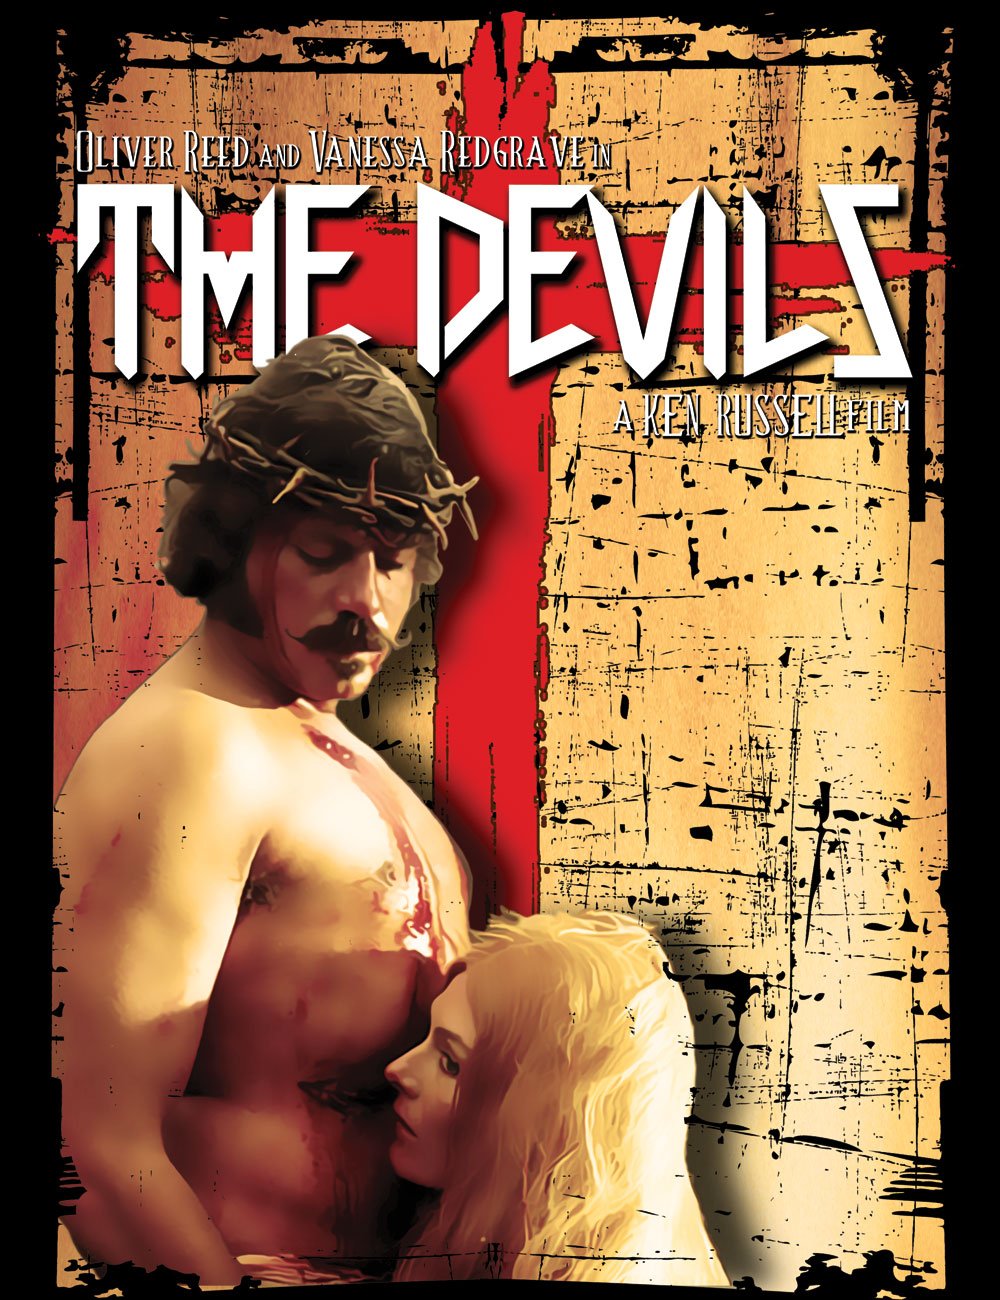 The Devils 1971 Film | Occult & Obscure Clothing | Night Channels Cardinal Red / Medium - Men's Tee